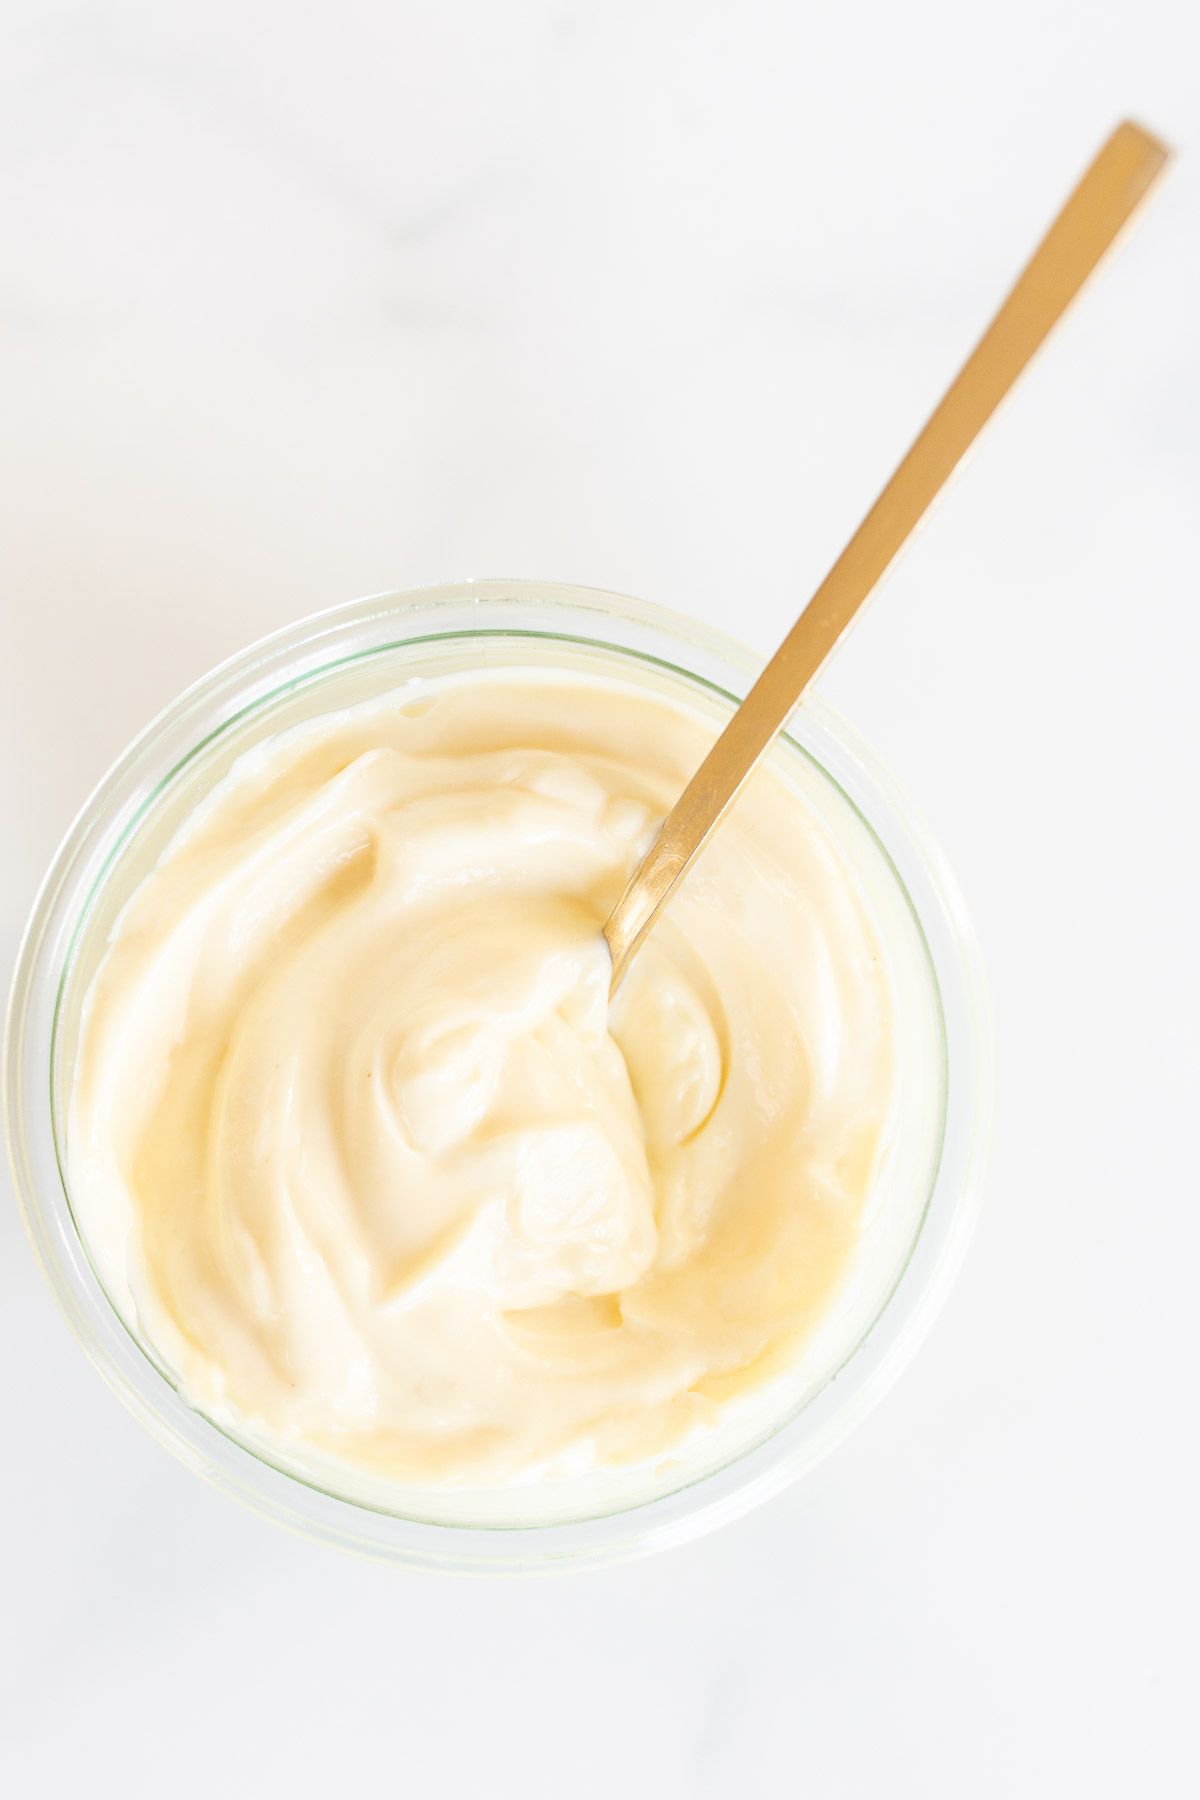 A small glass container of homemade mayonnaise with a gold spoon, resting on a marble countertop.